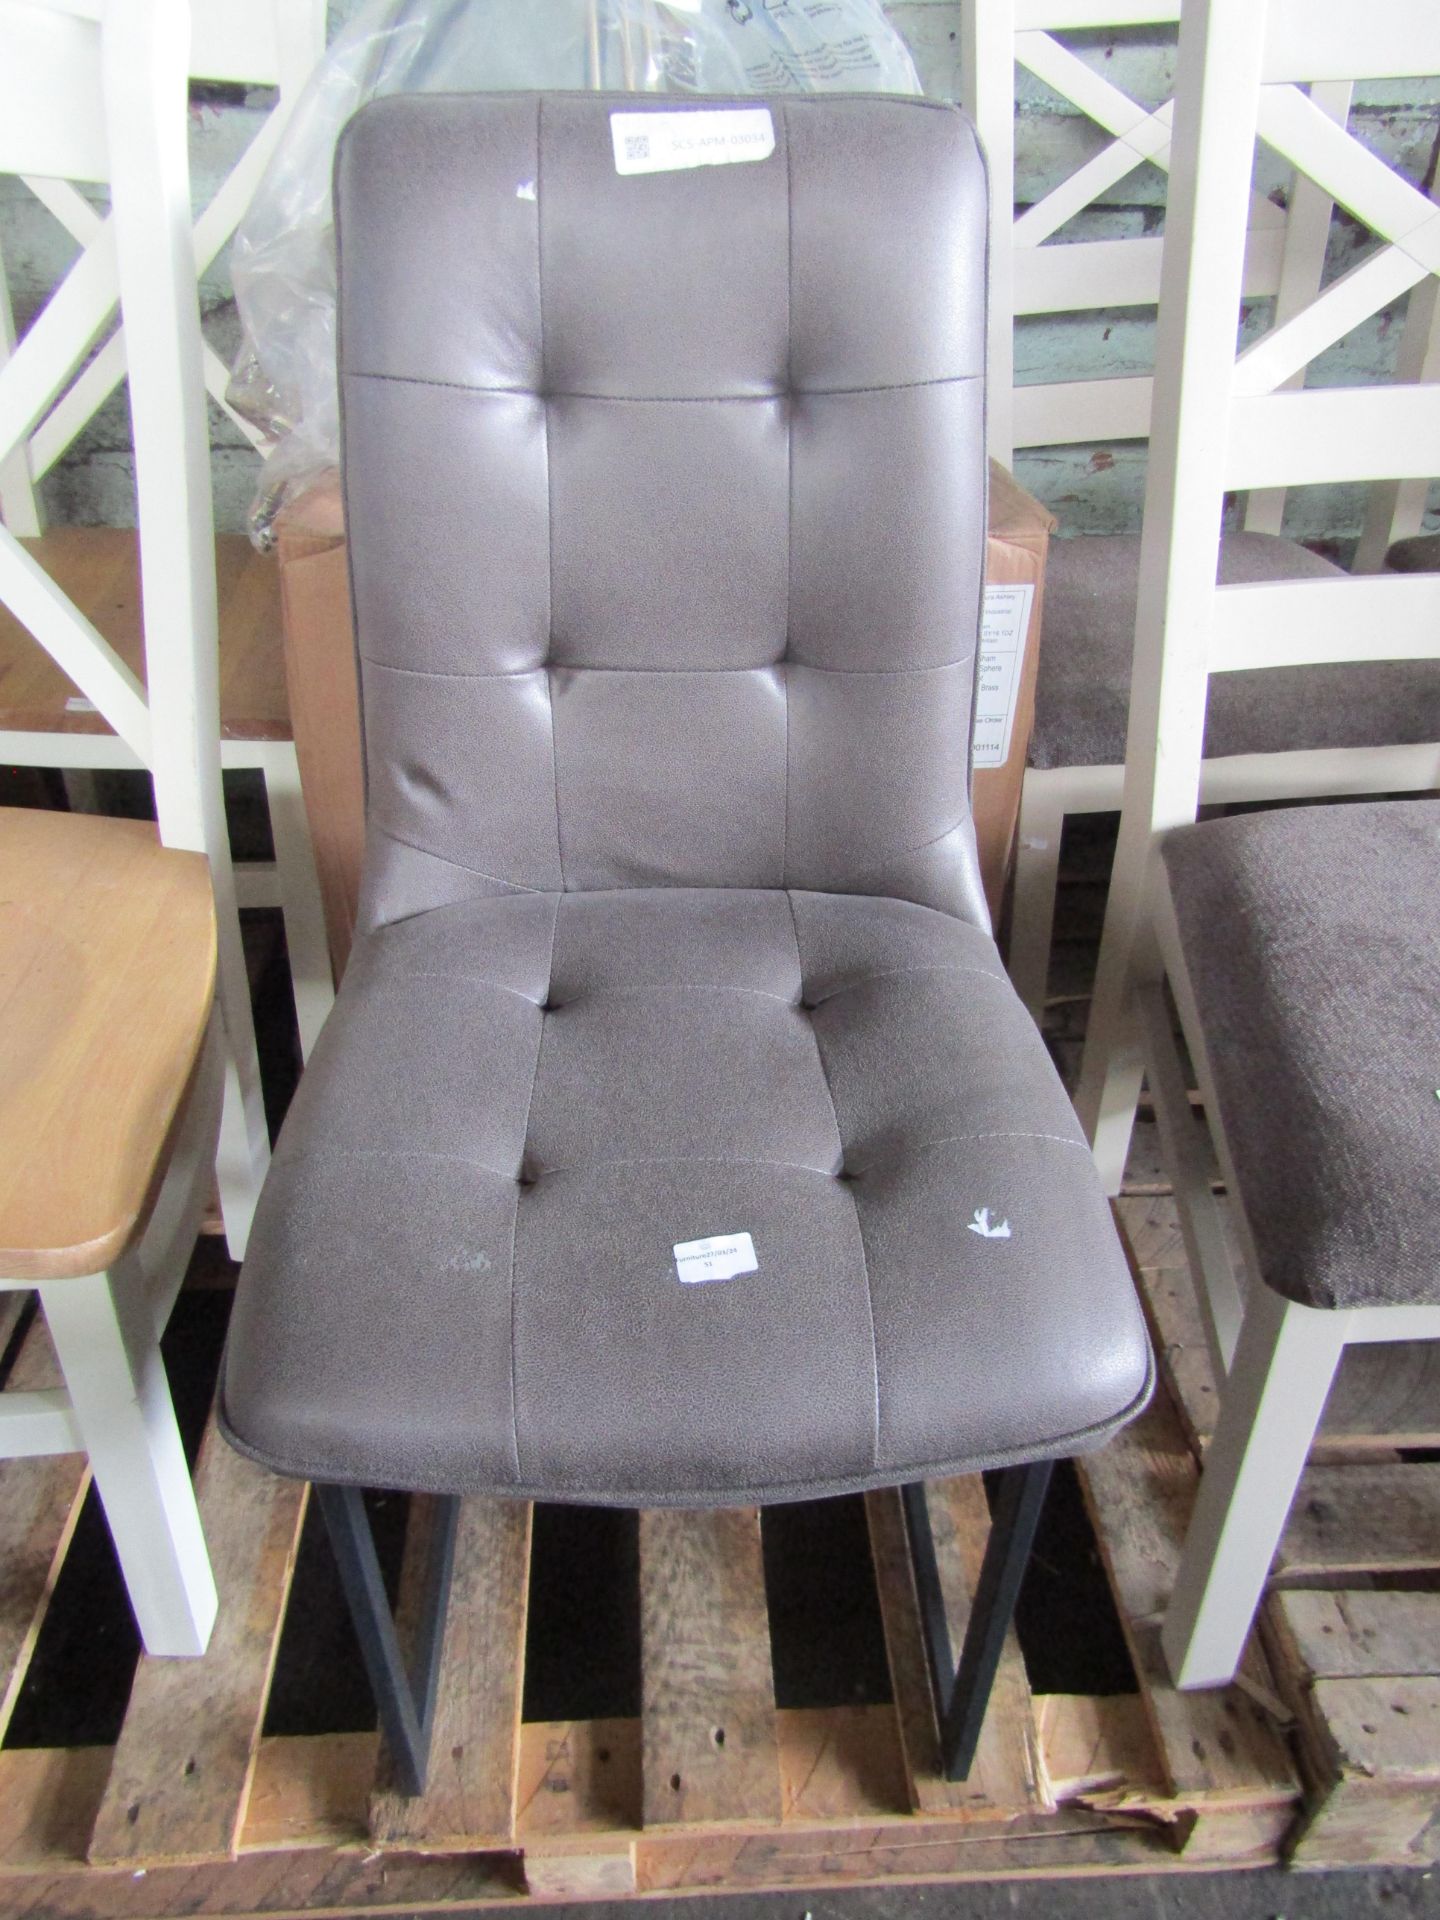 Scs Leather Dining Chair - Good Condition. - PMID: SCS-APM-03034